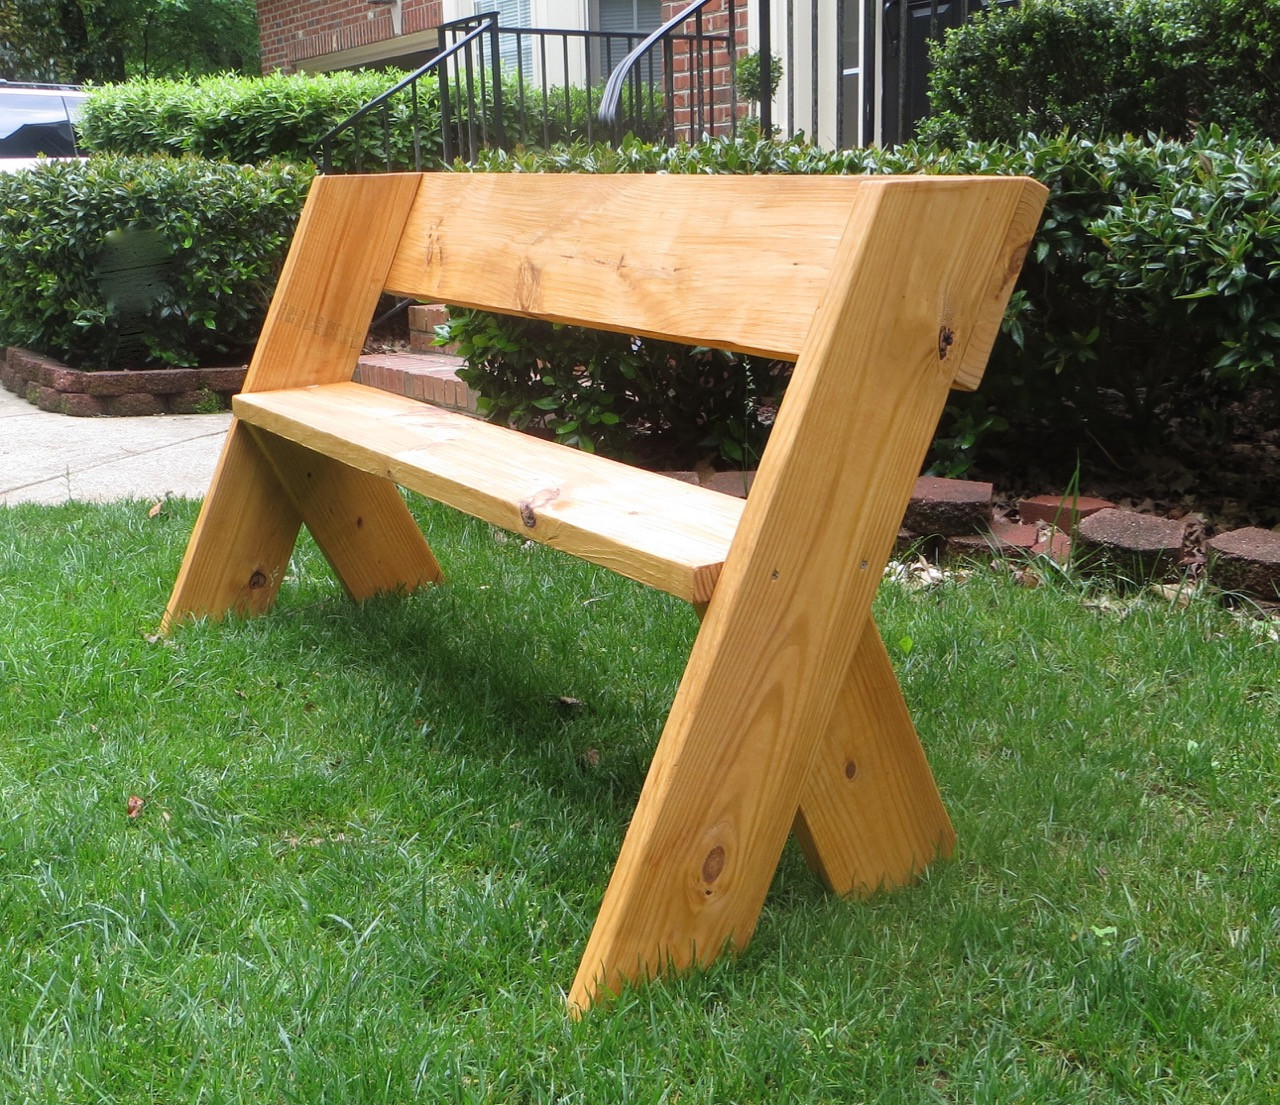 DIY Outdoor Wooden Benches
 The Project Lady DIY Tutorial $16 Simple Outdoor Wood Bench